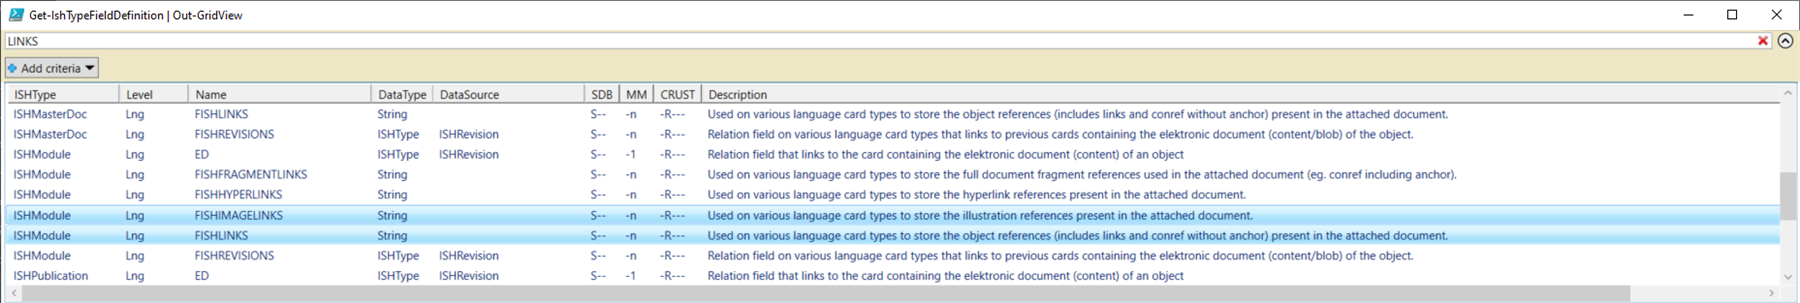 Screenshot of Trados Studio's Get-IshTypeFieldDefinition Out-GridView showing a list of LINKS with fields such as ISHType, Level, Name, DataType, DataSource, and CRUST with descriptions for each.